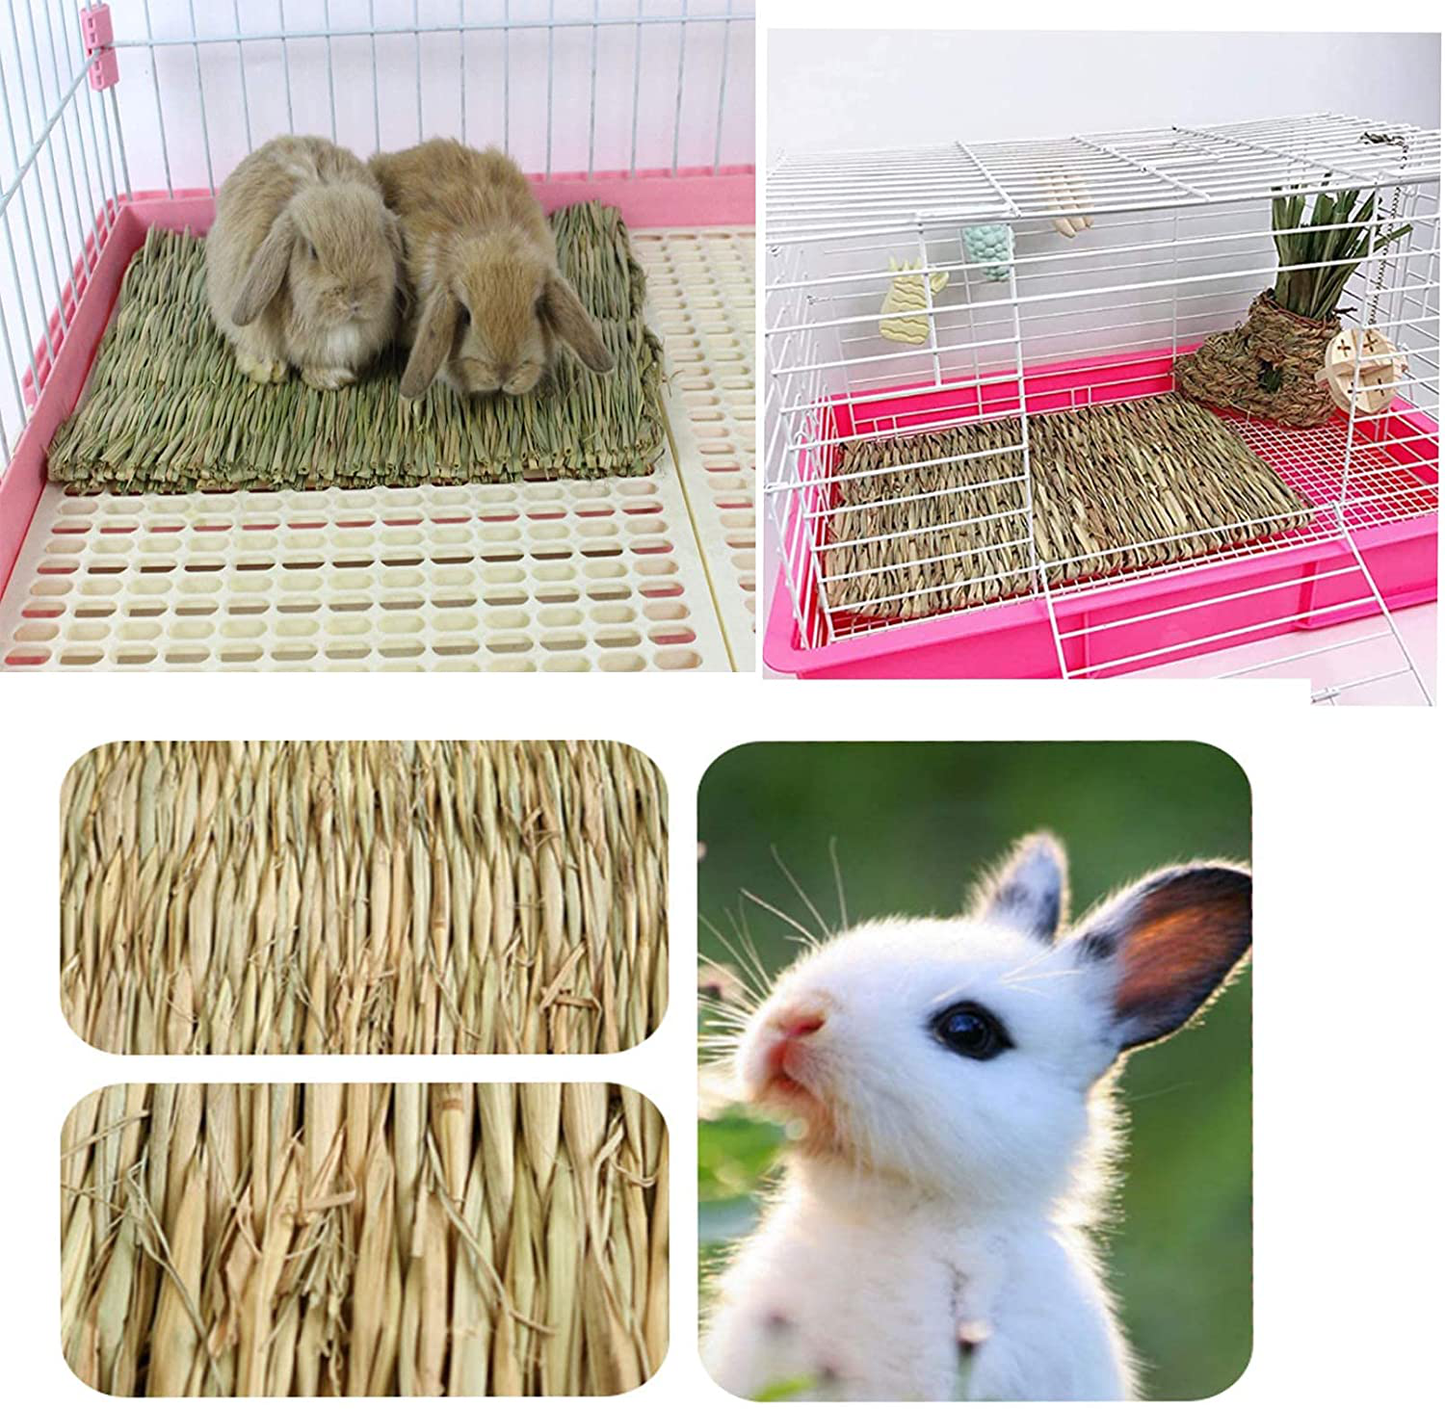 Hamiledyi Bunny Grass Mat Natural Woven Hamster Grass Bed Nest Small Animal Handmade Bedding Hay Mat Chewing Play Toy for Guinea Pig Chinchilla Rabbit Squirrel Hedgehog(6 Pack)